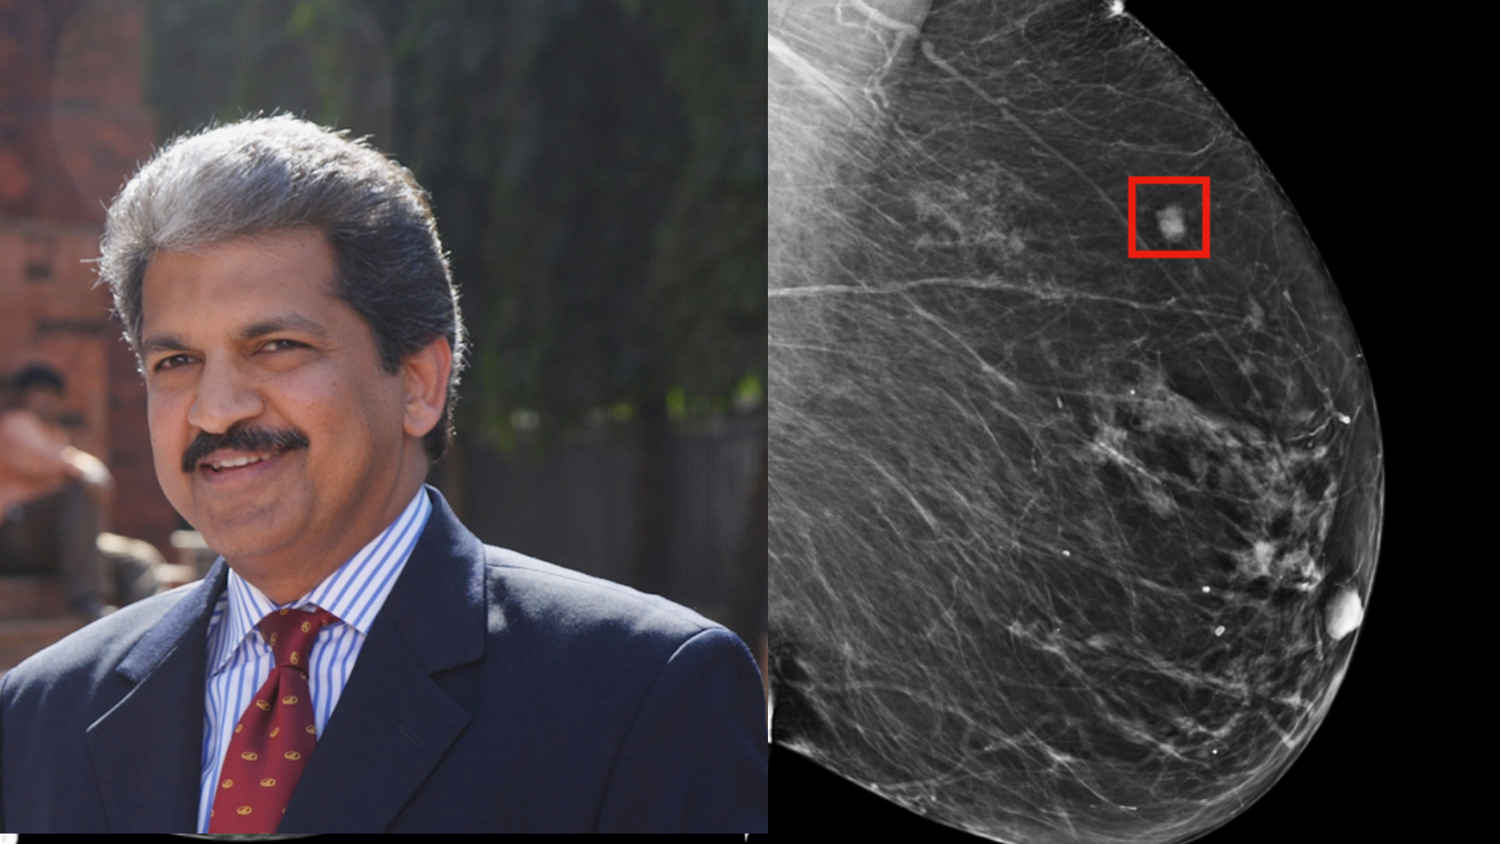 AI predicts Breast Cancer 5 years in advance, Anand Mahindra reacts